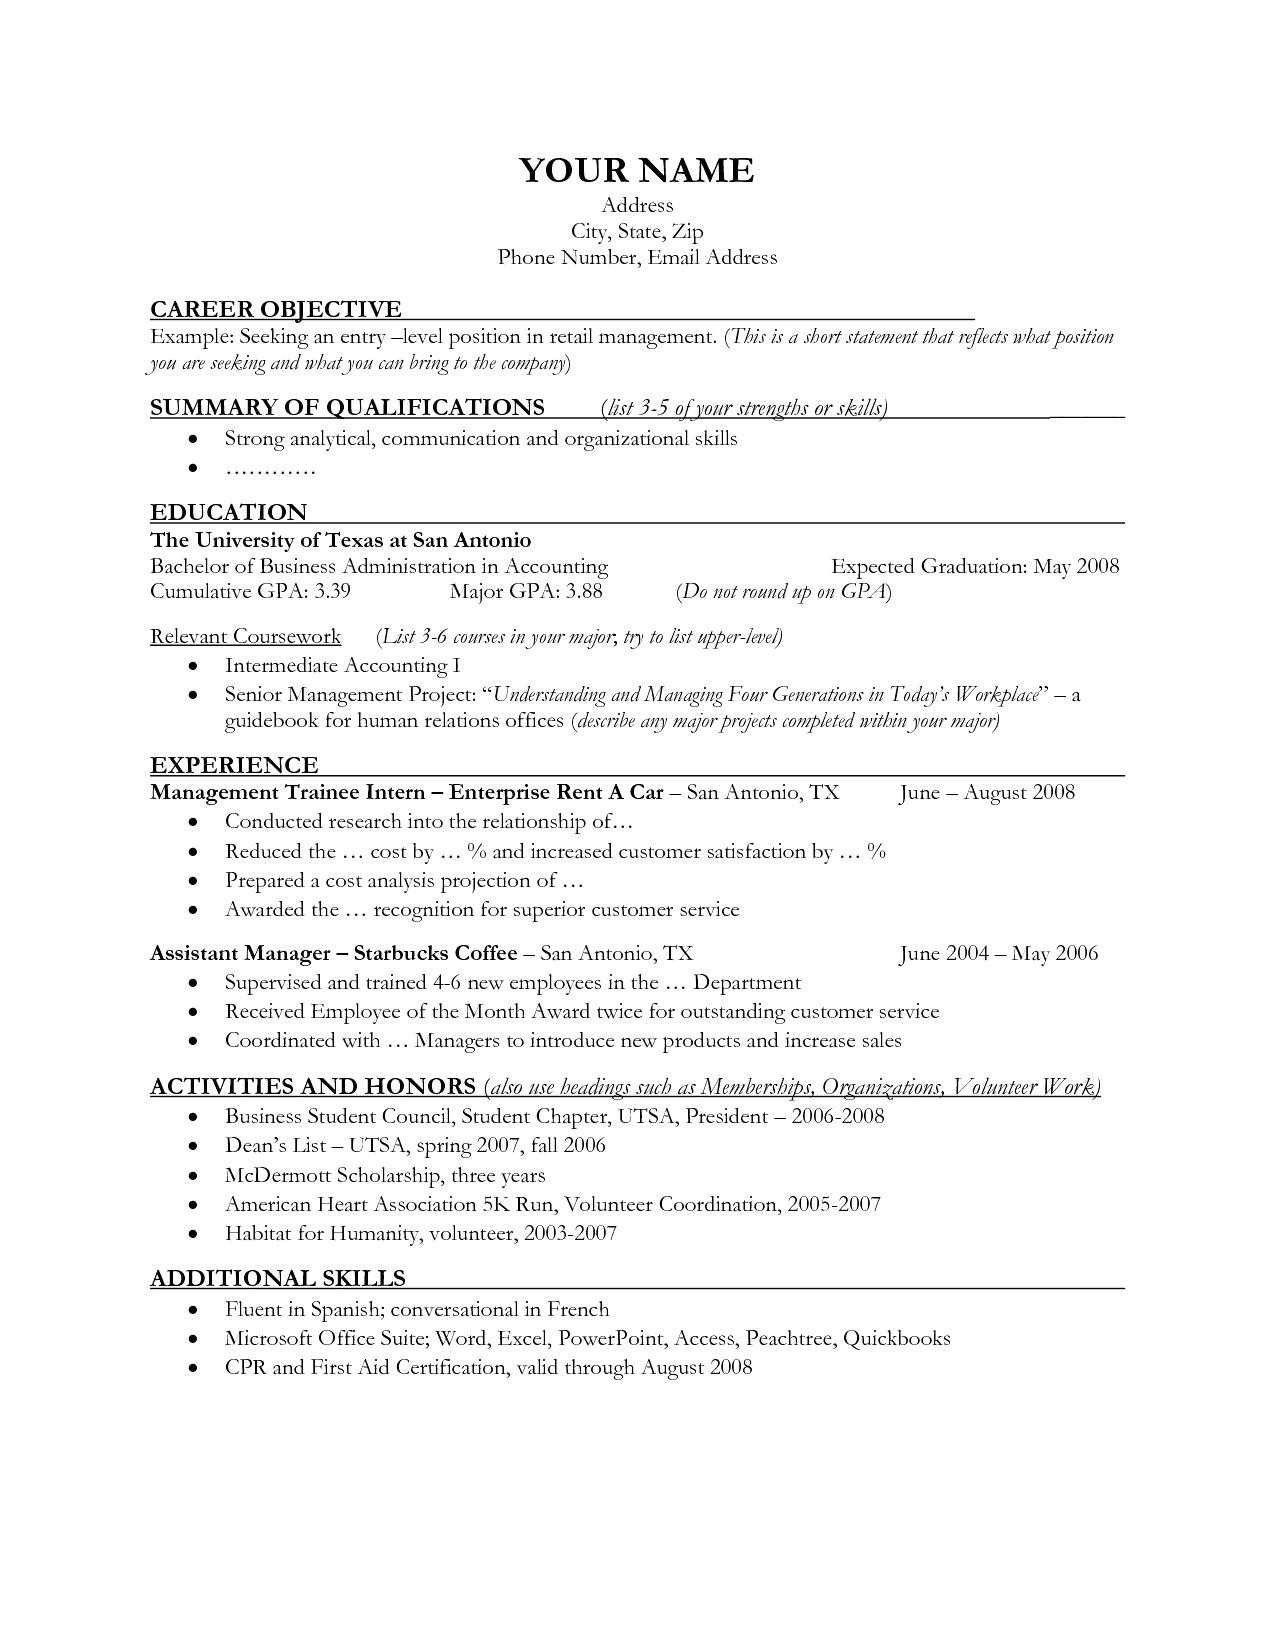 Sample Objectives for Resume In Retail 77 New Photos Of Good Resume Objectives for Retail Jobs Check More …